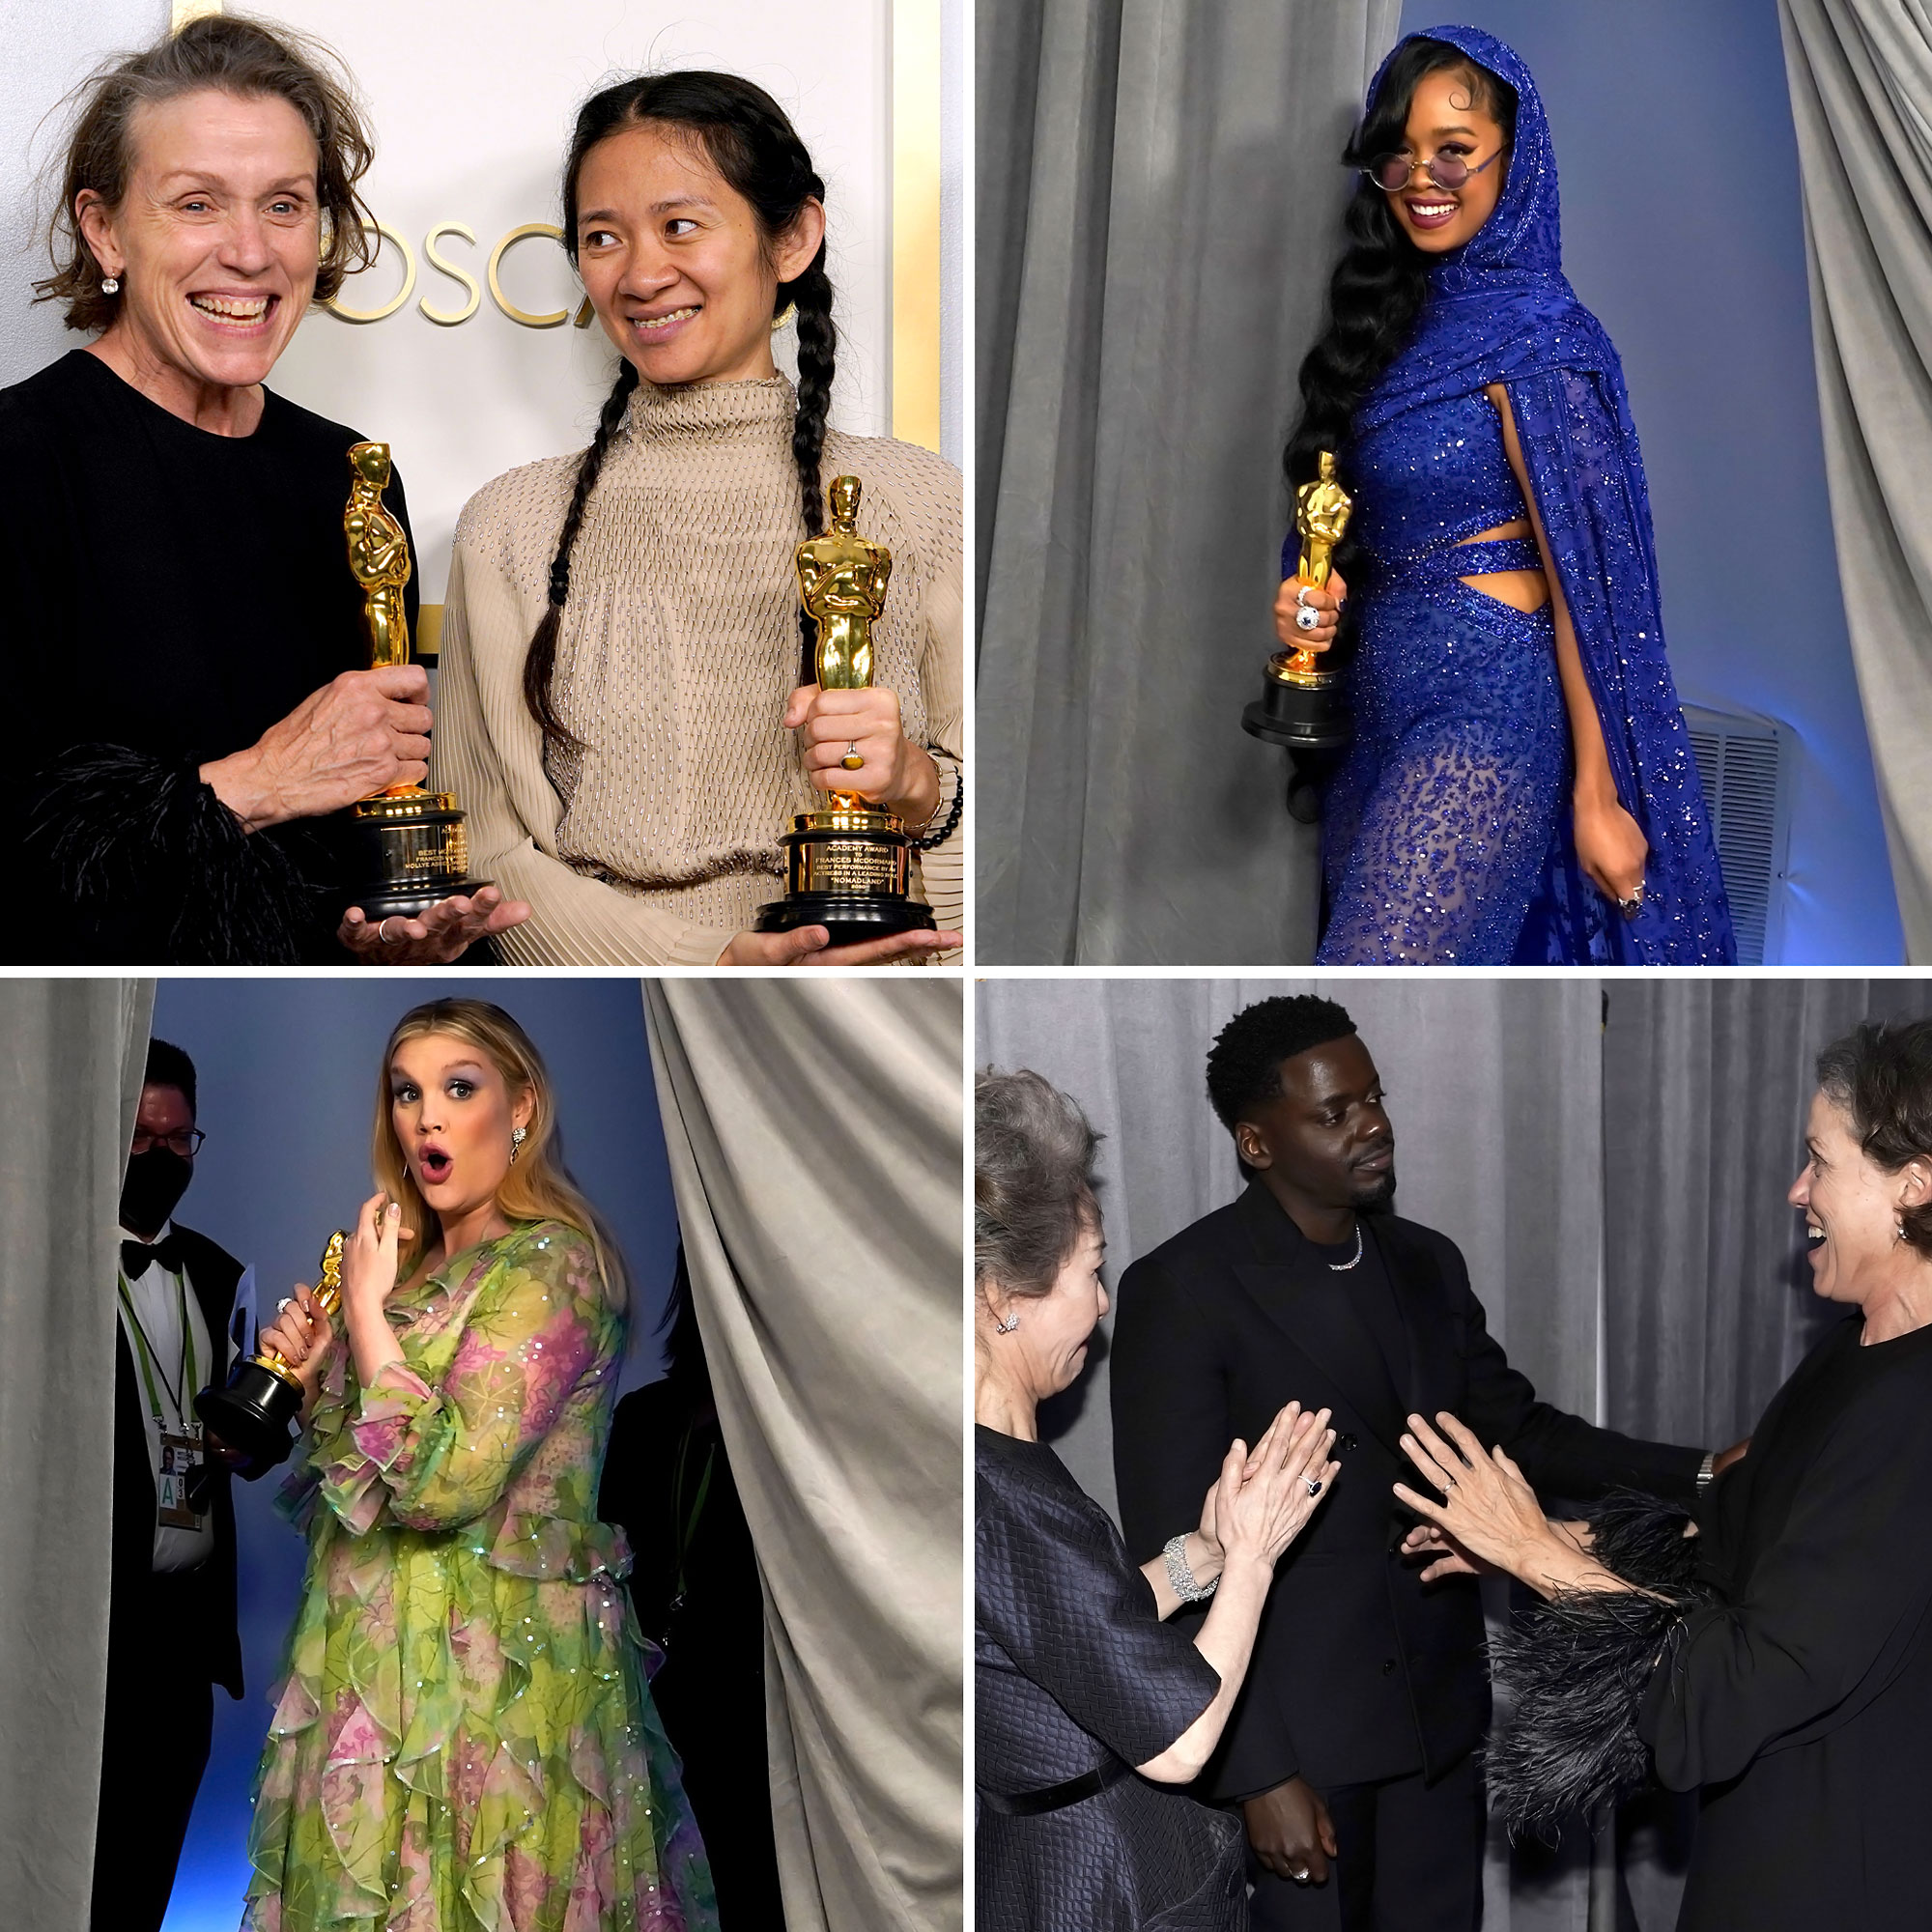 Oscars 2021 Backstage Photos: What You Didn't See on TV